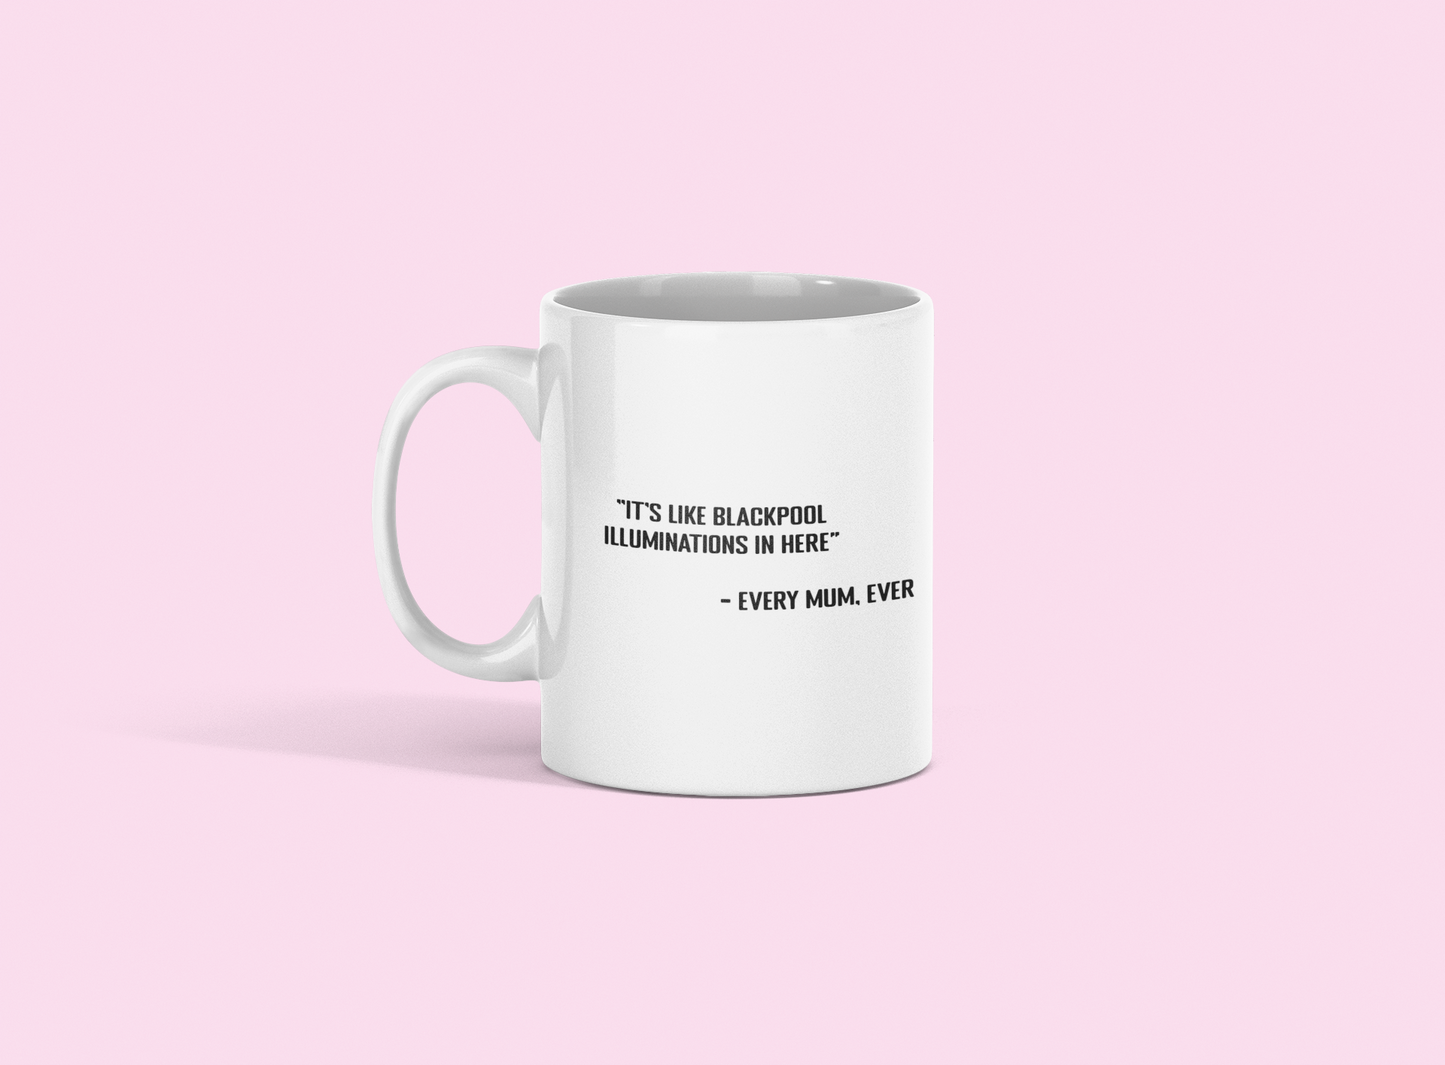 A glossy white 11oz mug with the statement 'it's like Blackpool illuminations in here - every mum, ever' printed on it's centre. The mug is placed against a pale pink background. 